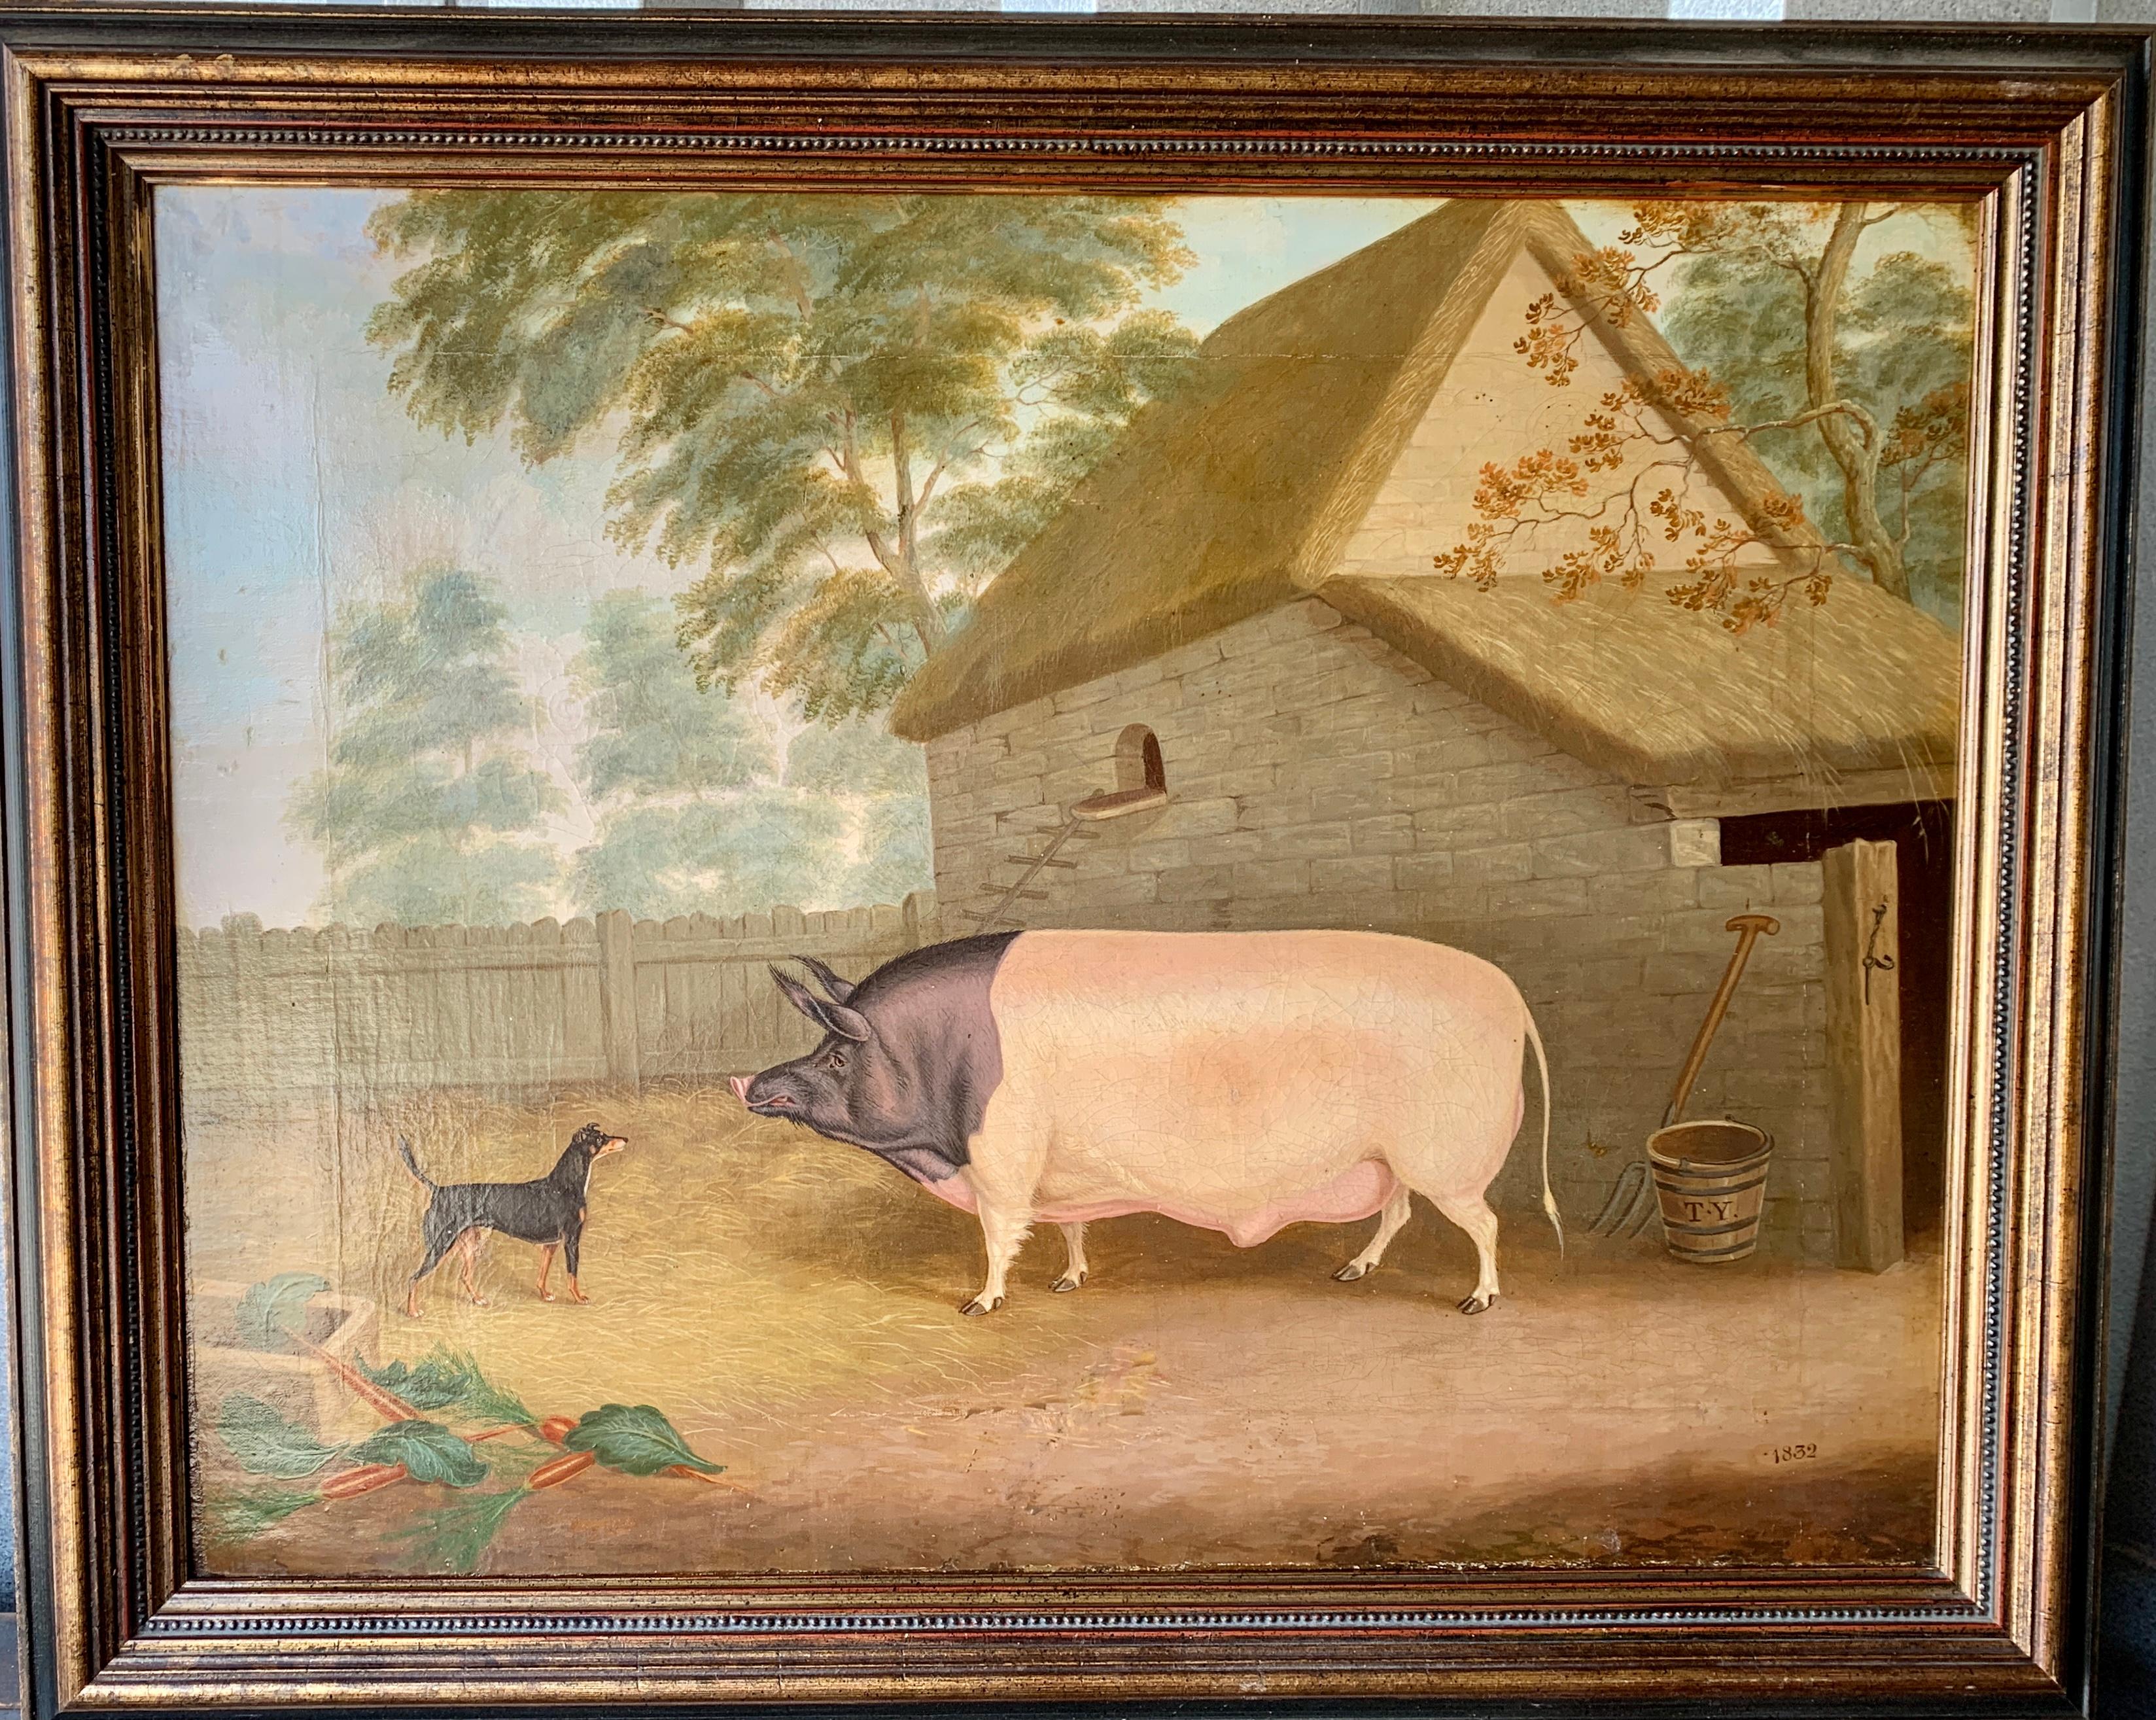 Unknown Portrait Painting - 19th Century English Folk art, Prize Pig and terrier in a landscape with barn